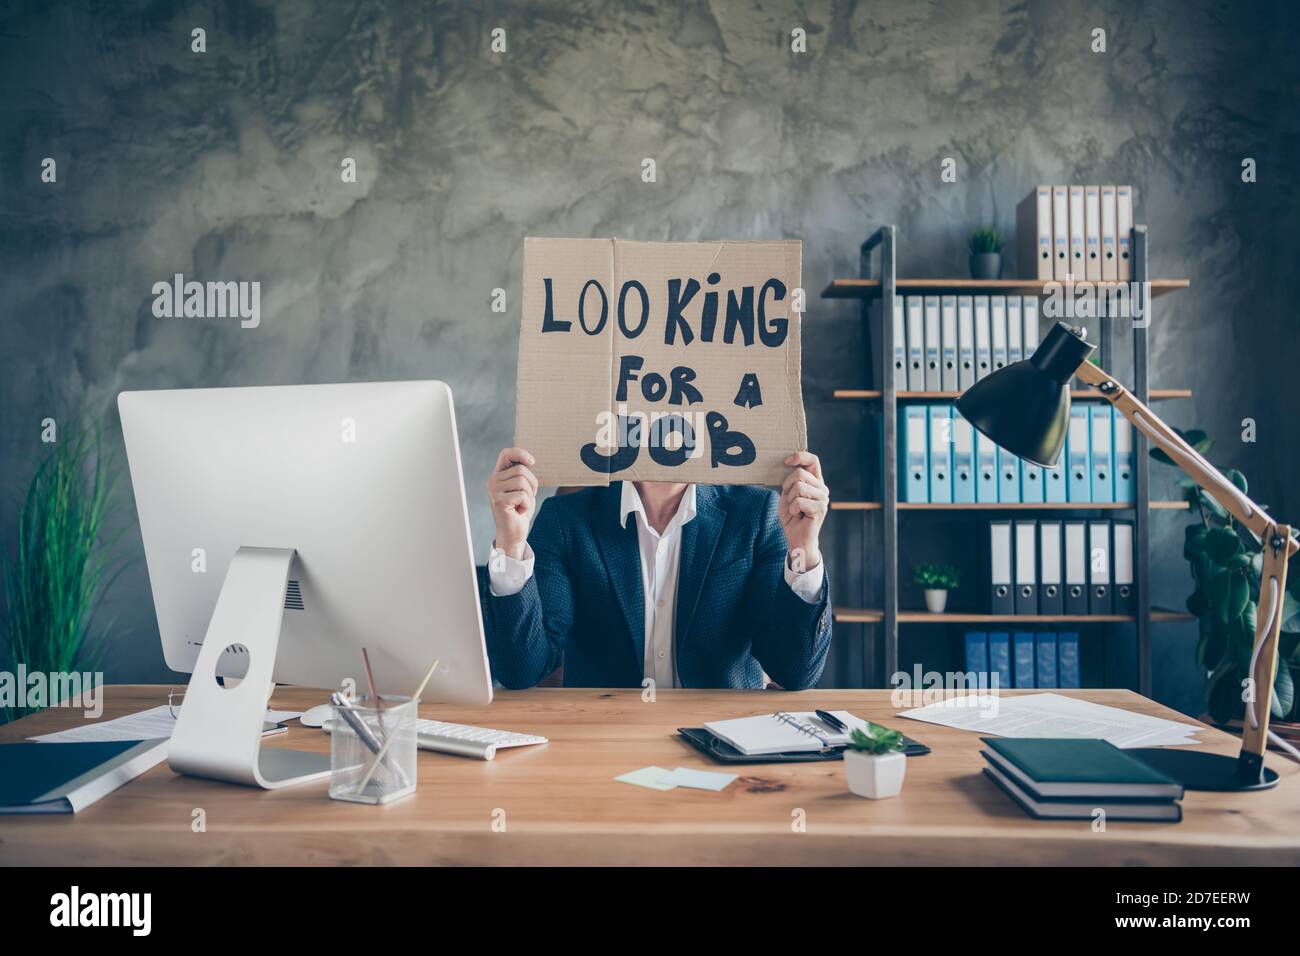 His he fired poor finance agent broker guy holding in hands promo placard hiding face looking new chance job economy investment insurance at loft Stock Photo